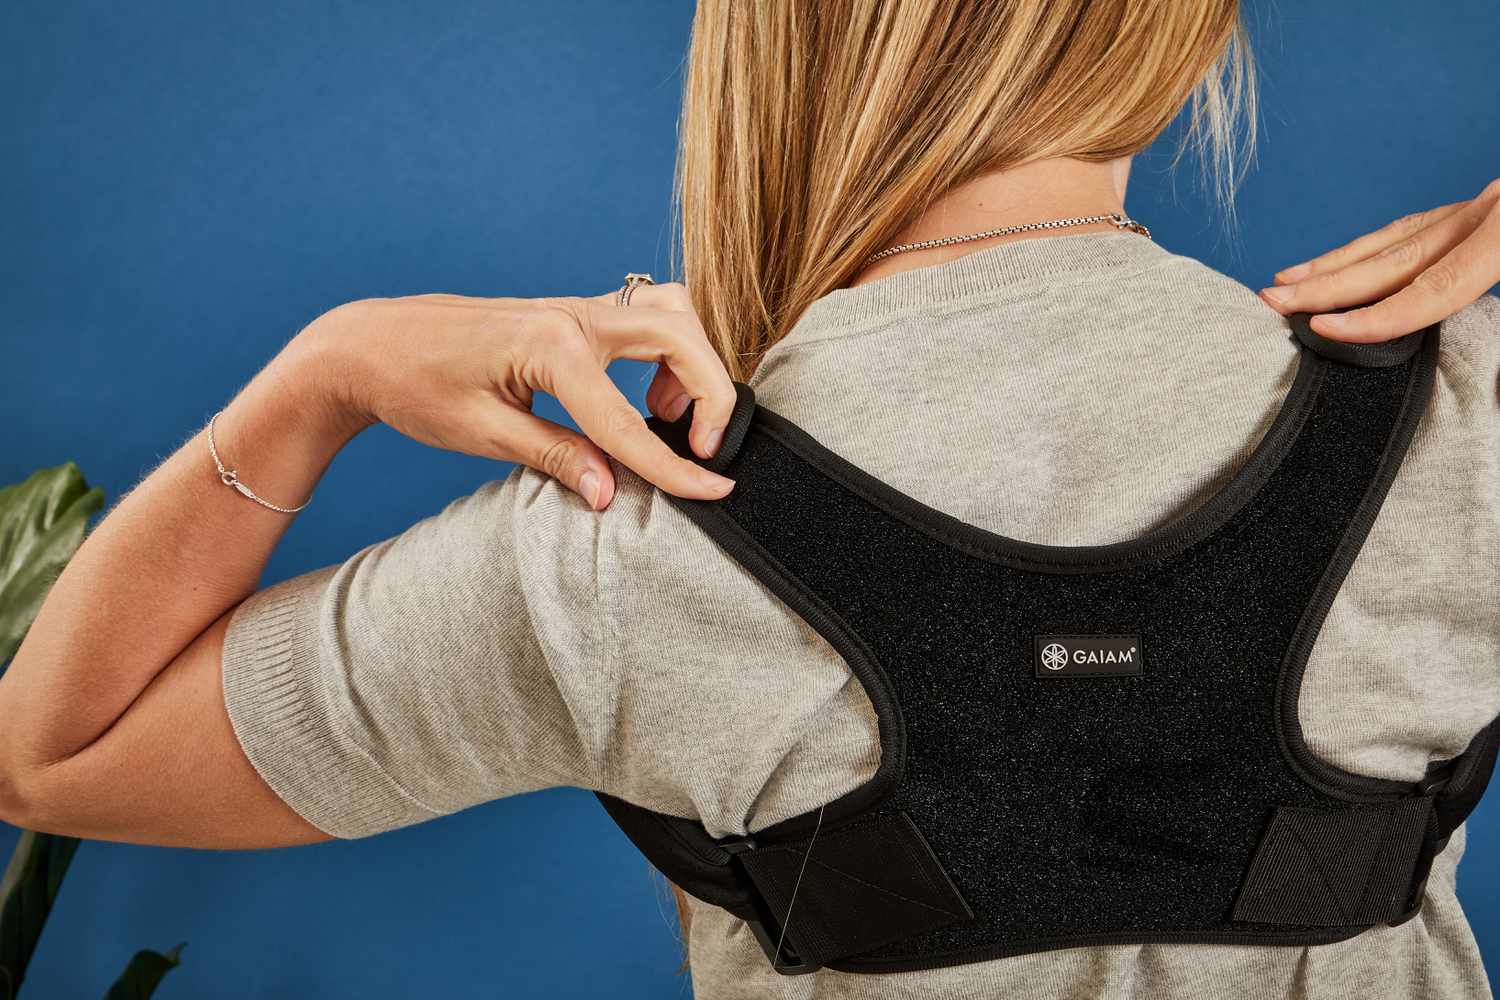 The Ultimate Guide to Choosing the Best Posture Corrector